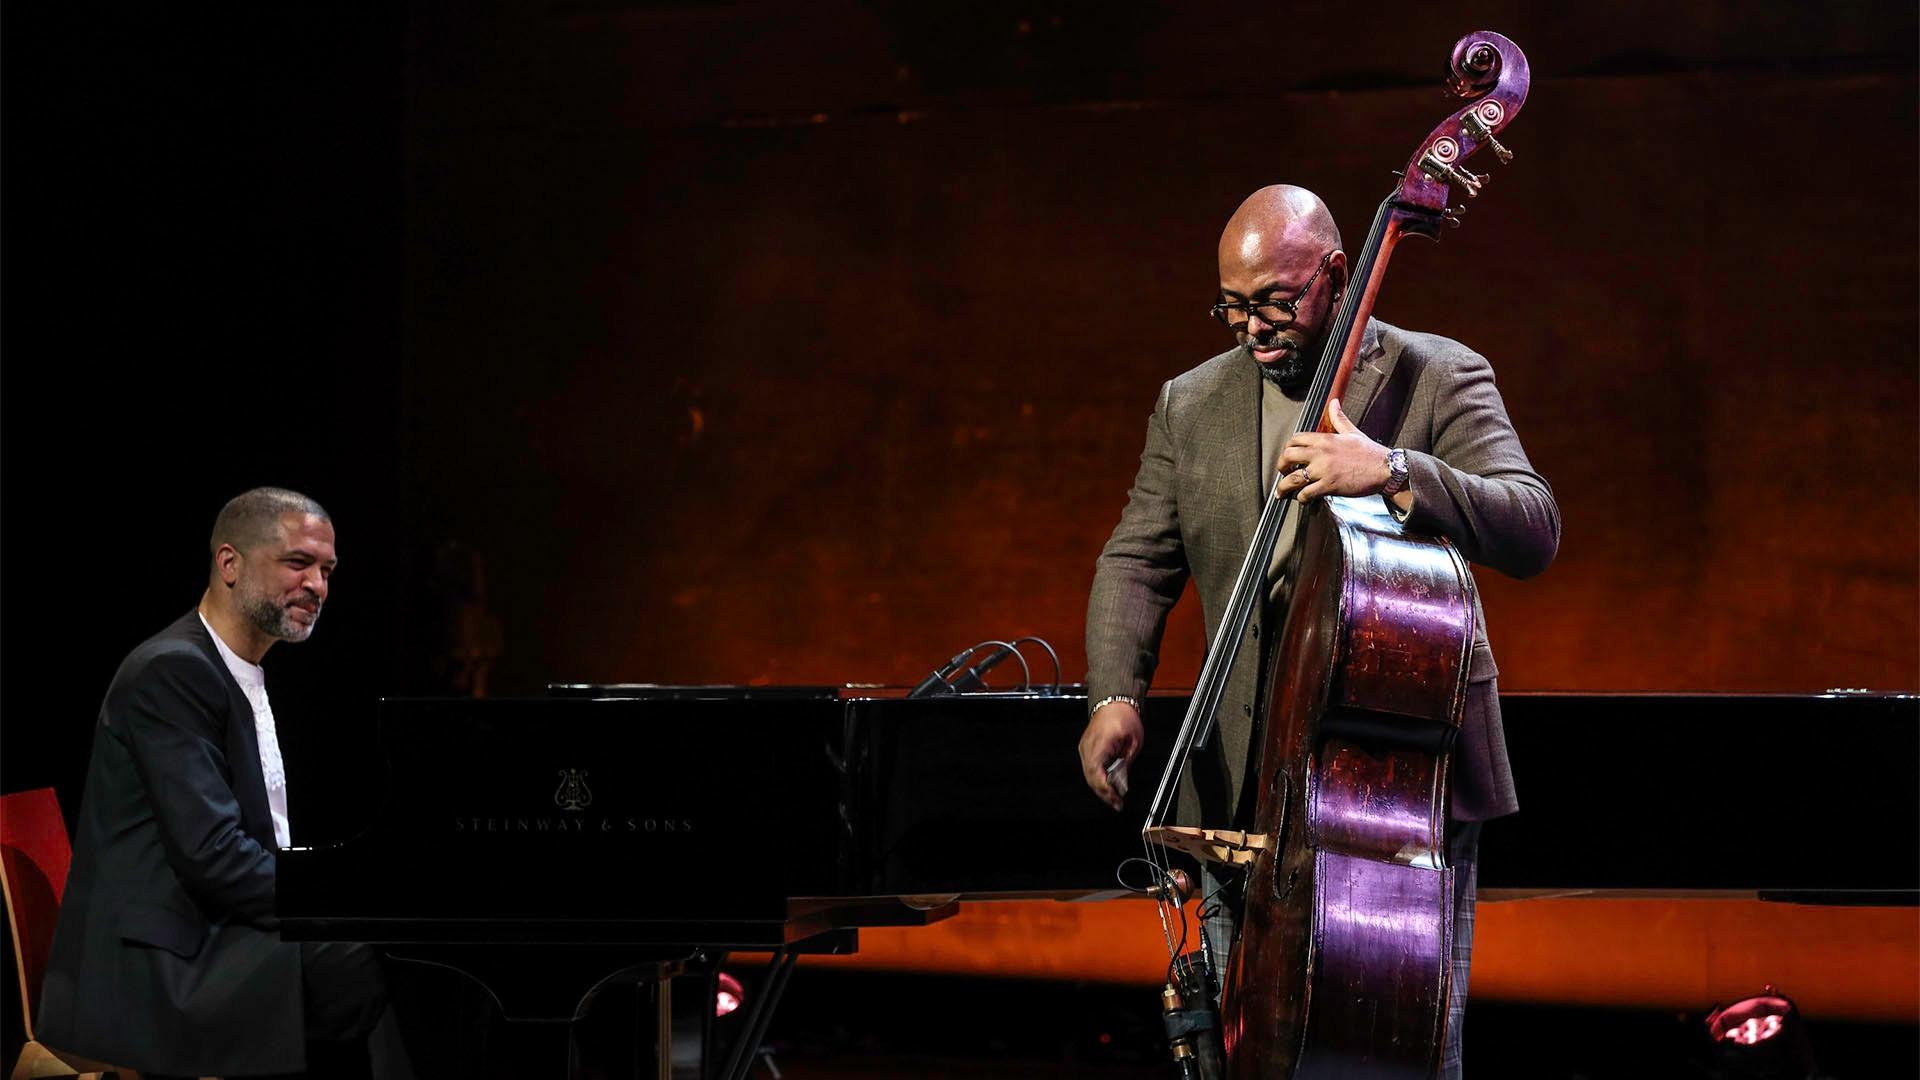 Image of Jason Moran and Christian McBride performing together on stage.